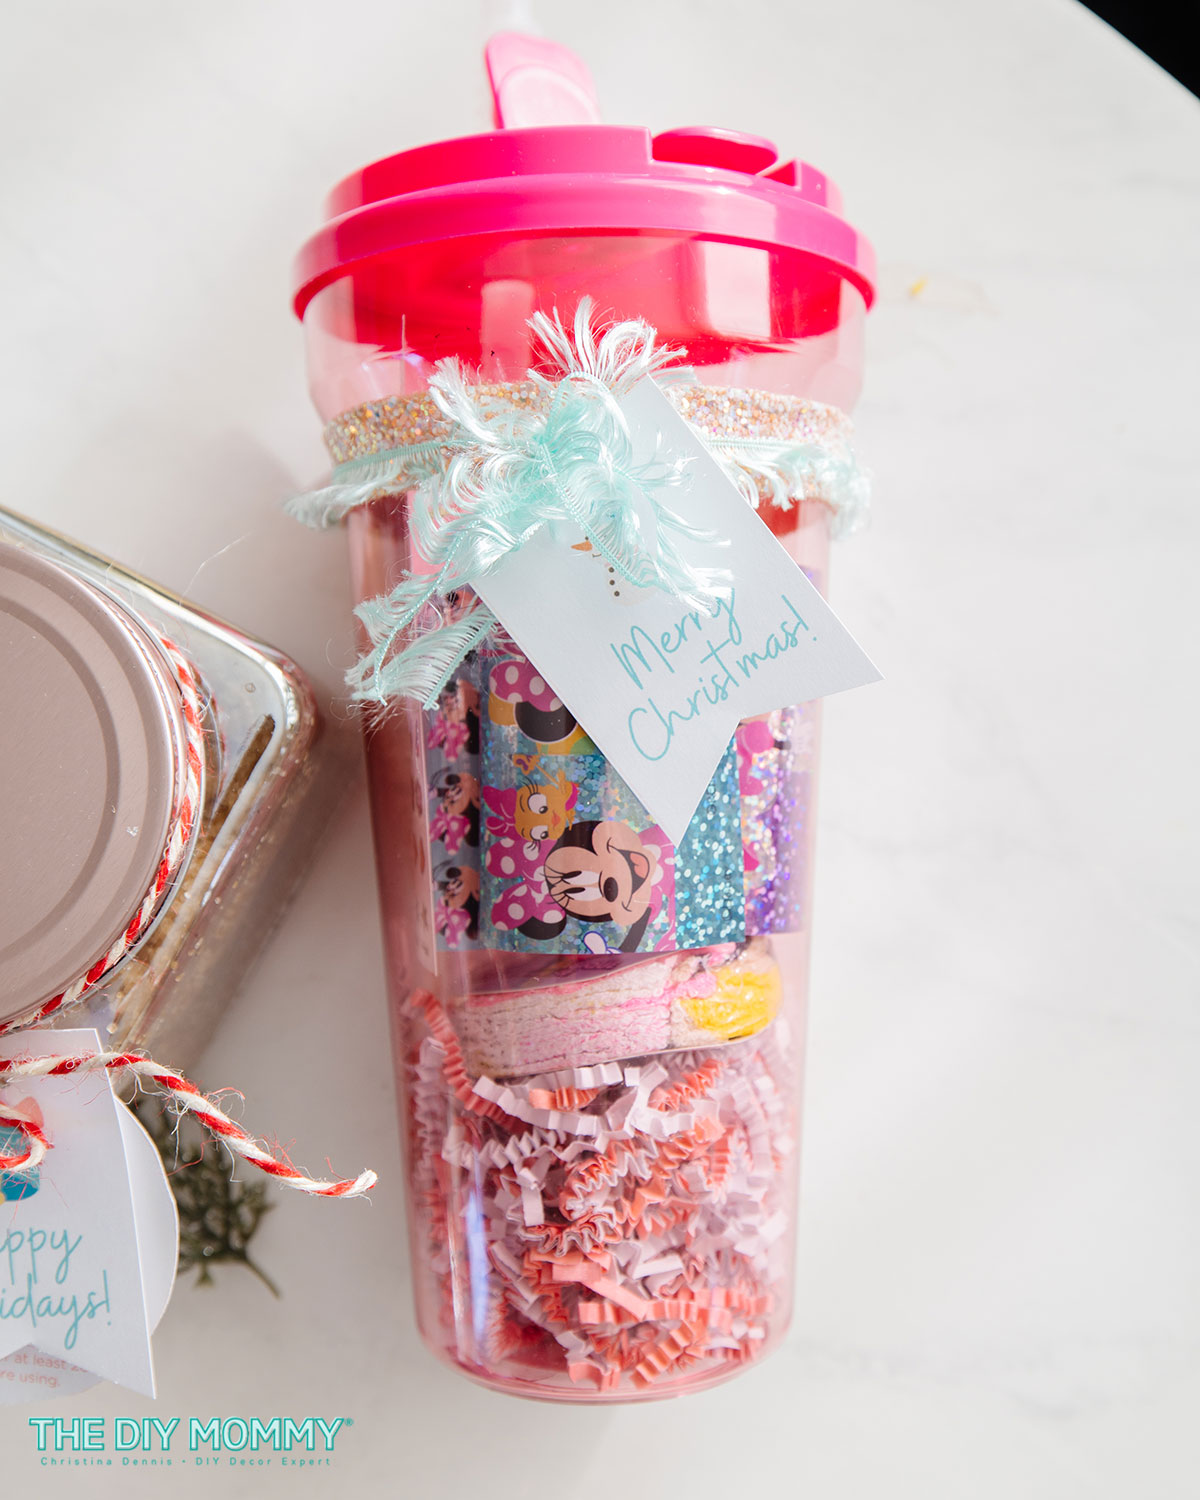 $5 Dollar Store Gift Ideas for Everyone on Your List - Organize by Dreams